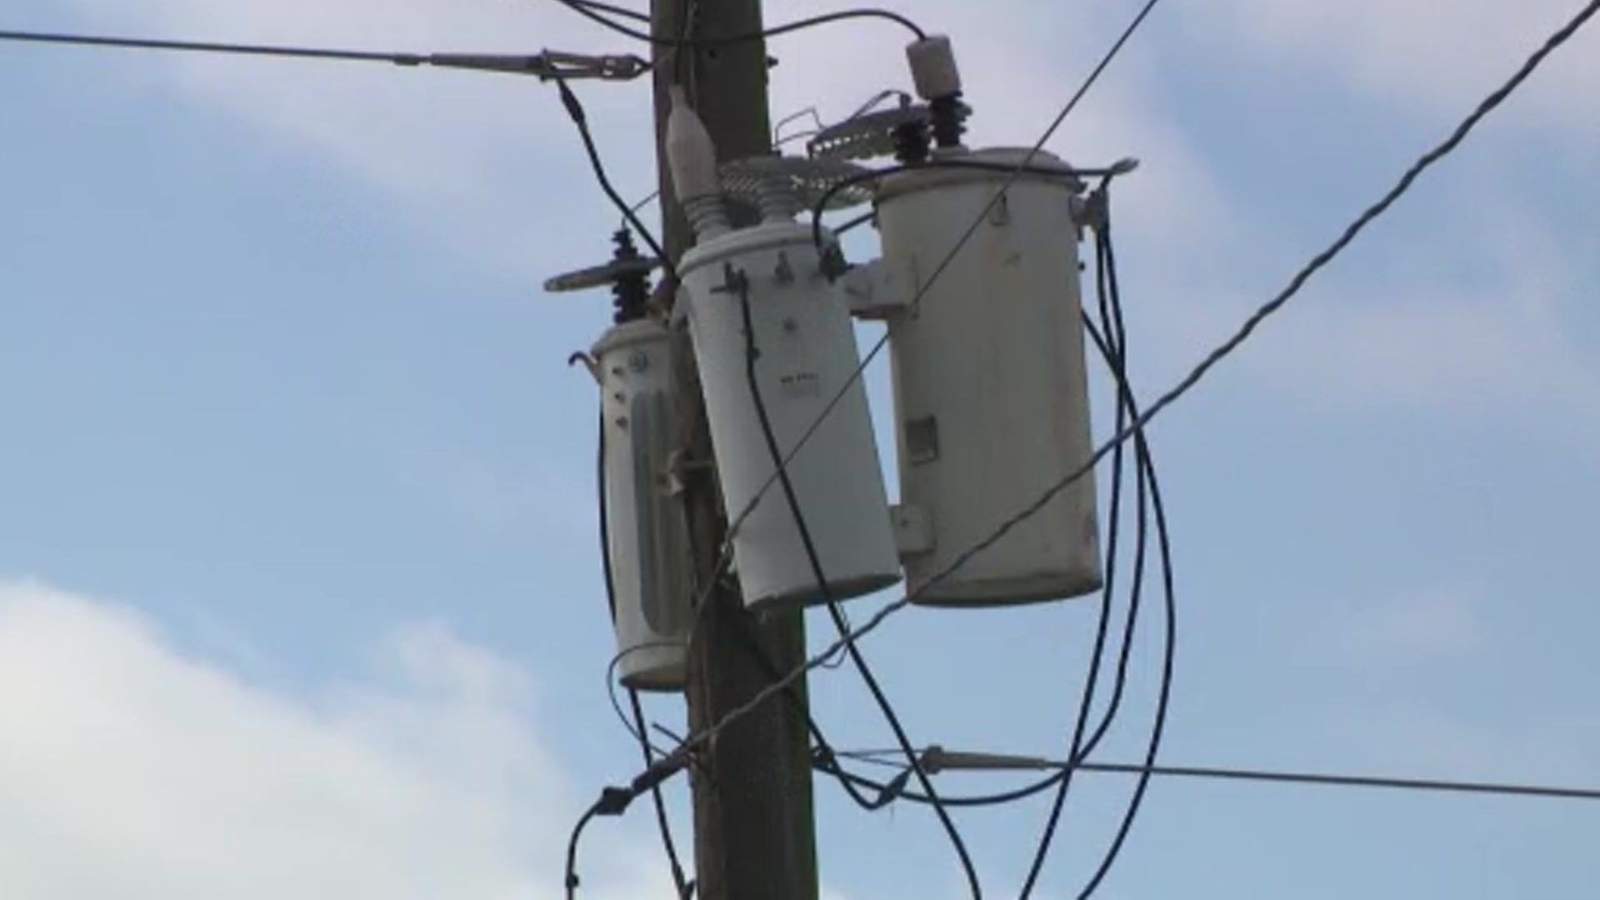 ERCOT says limited interruptions are possible overnight due to snow, icy temperatures